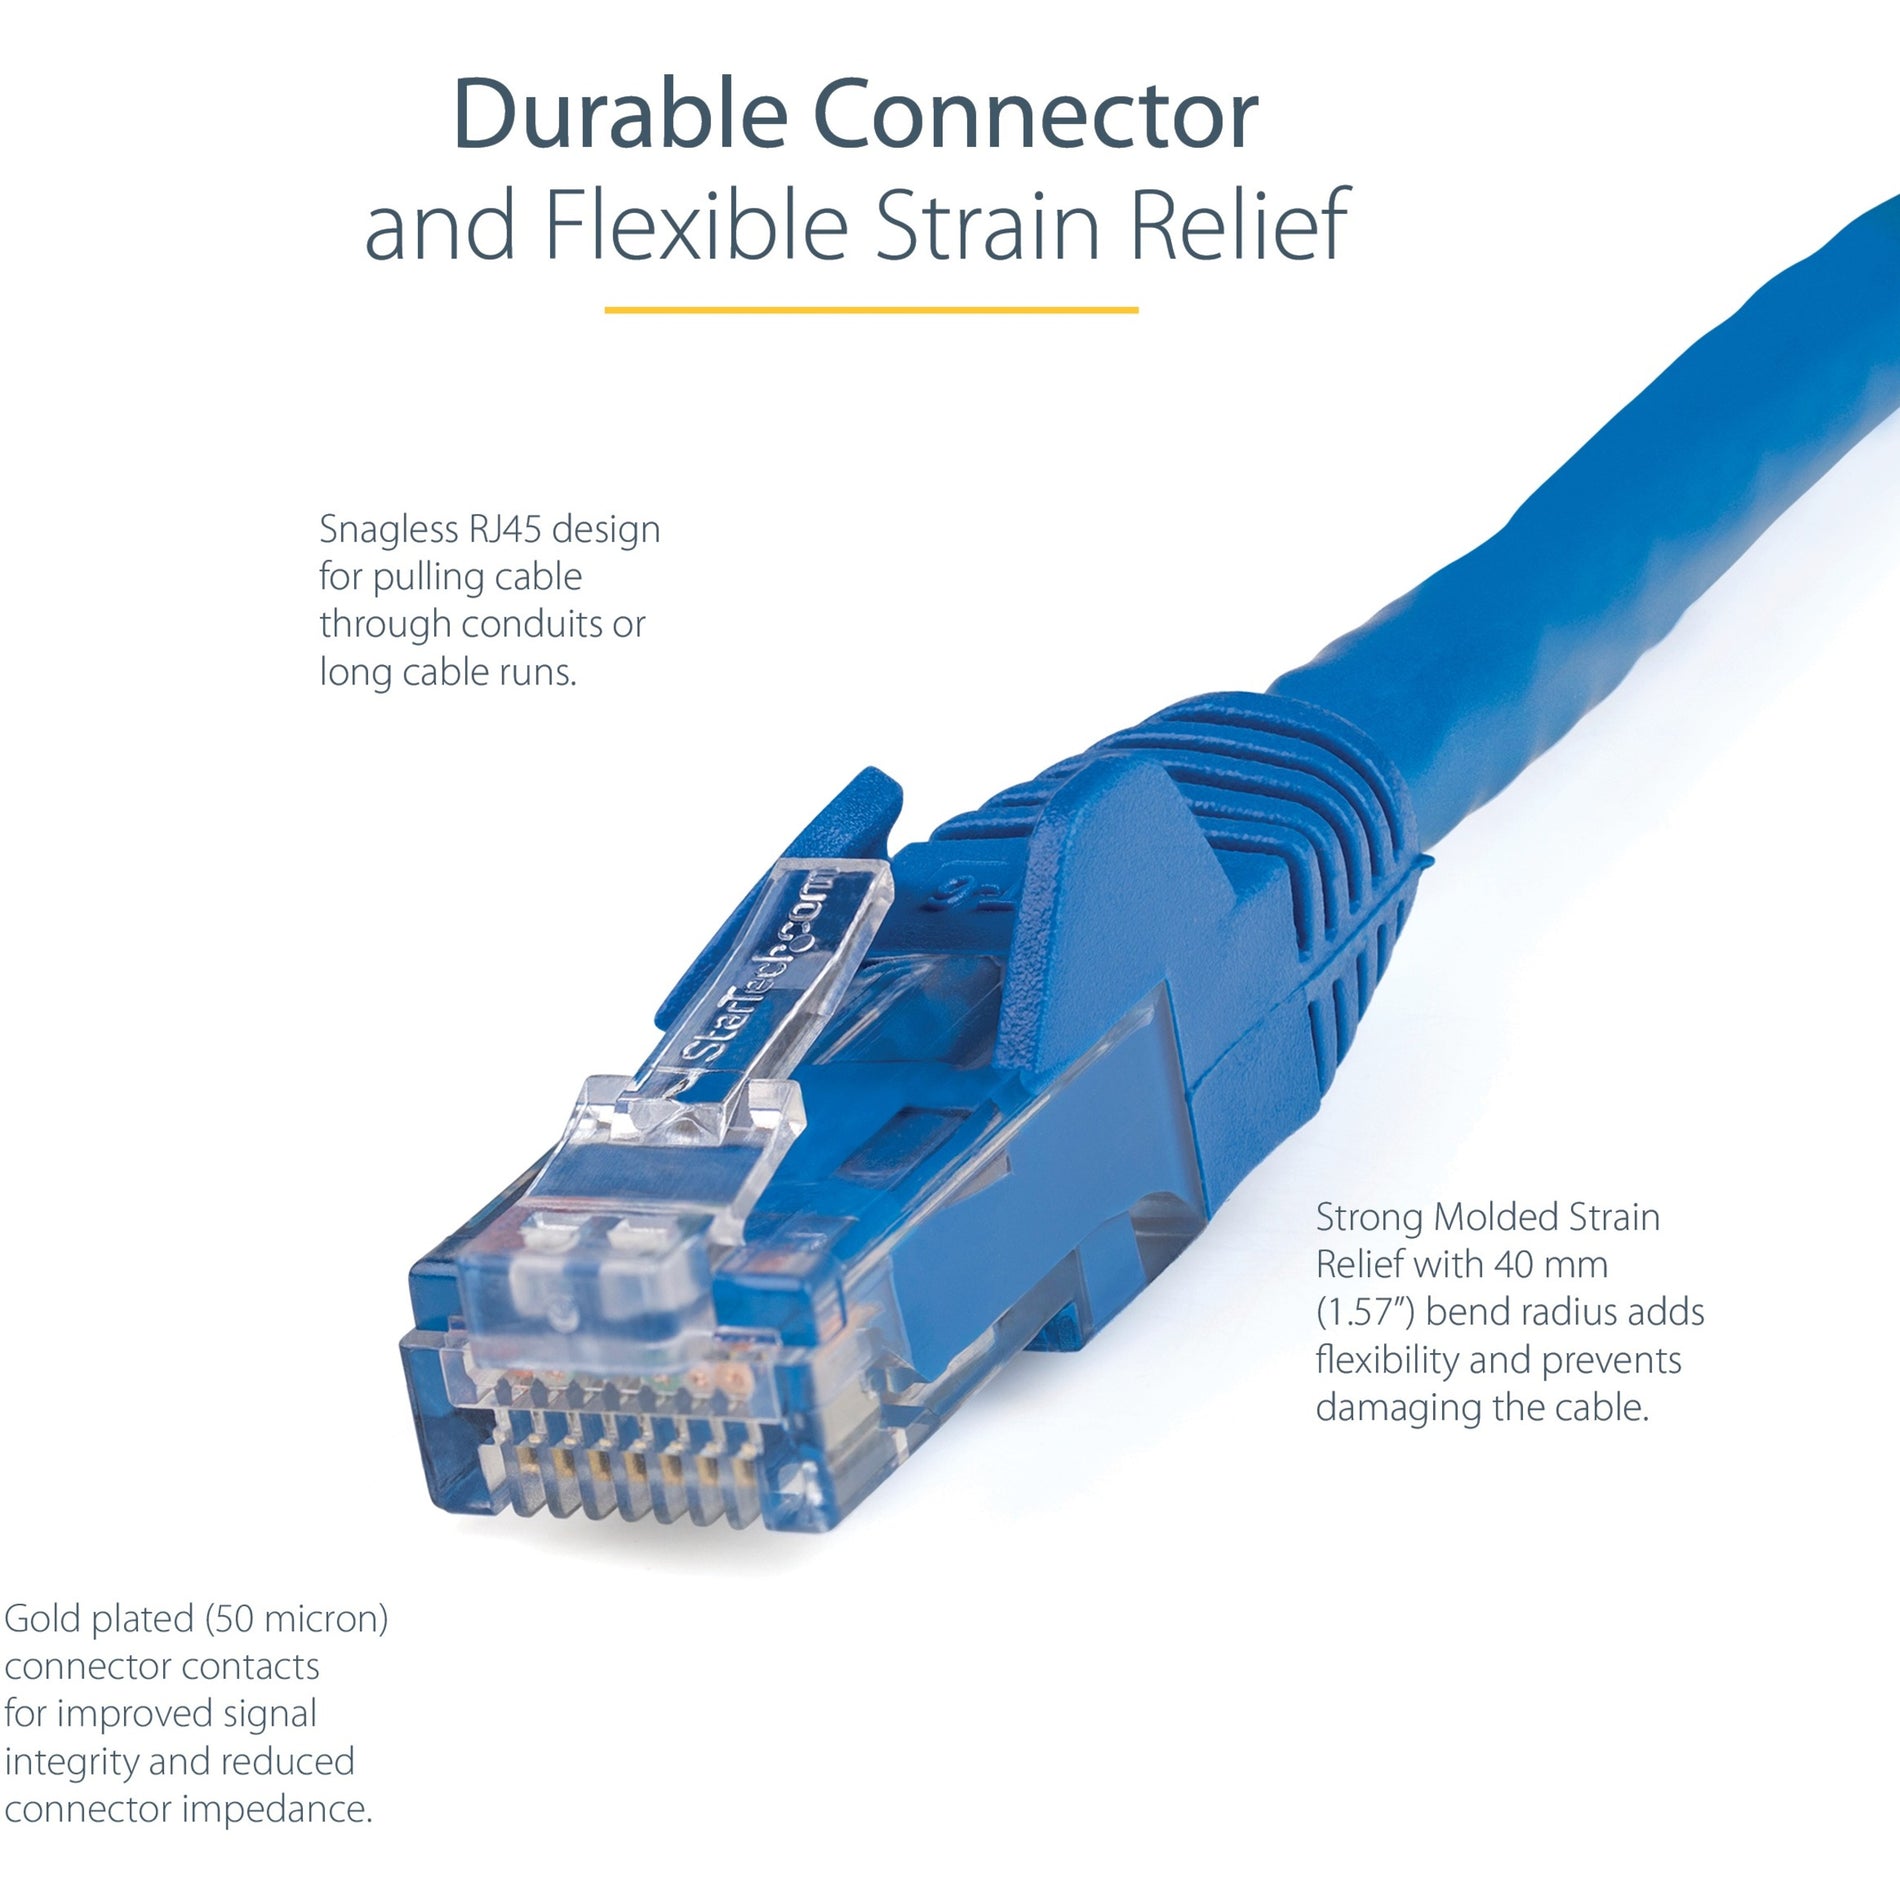 StarTech.com N6PATCH8BL Cat6 Patch Cable, 8 ft Blue Ethernet Cable with Snagless RJ45 Connectors